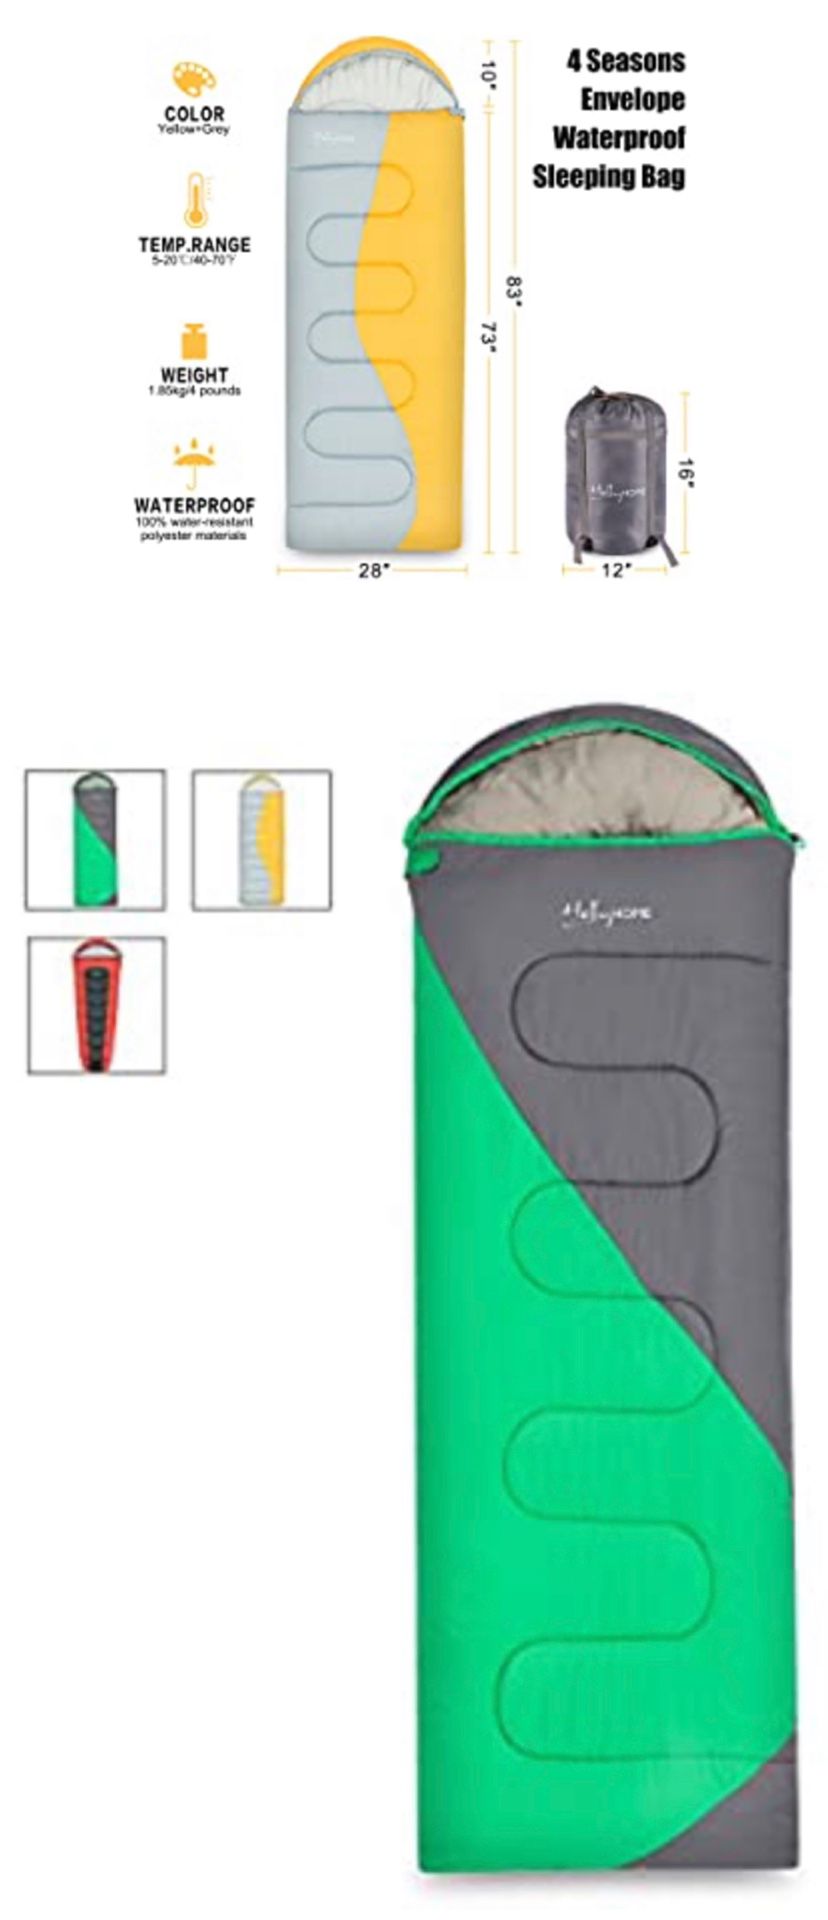 4 Seasons Envelope Sleeping Bag for Camping/Hiking/Backpacking, Easy to Compress and Water-Resistant